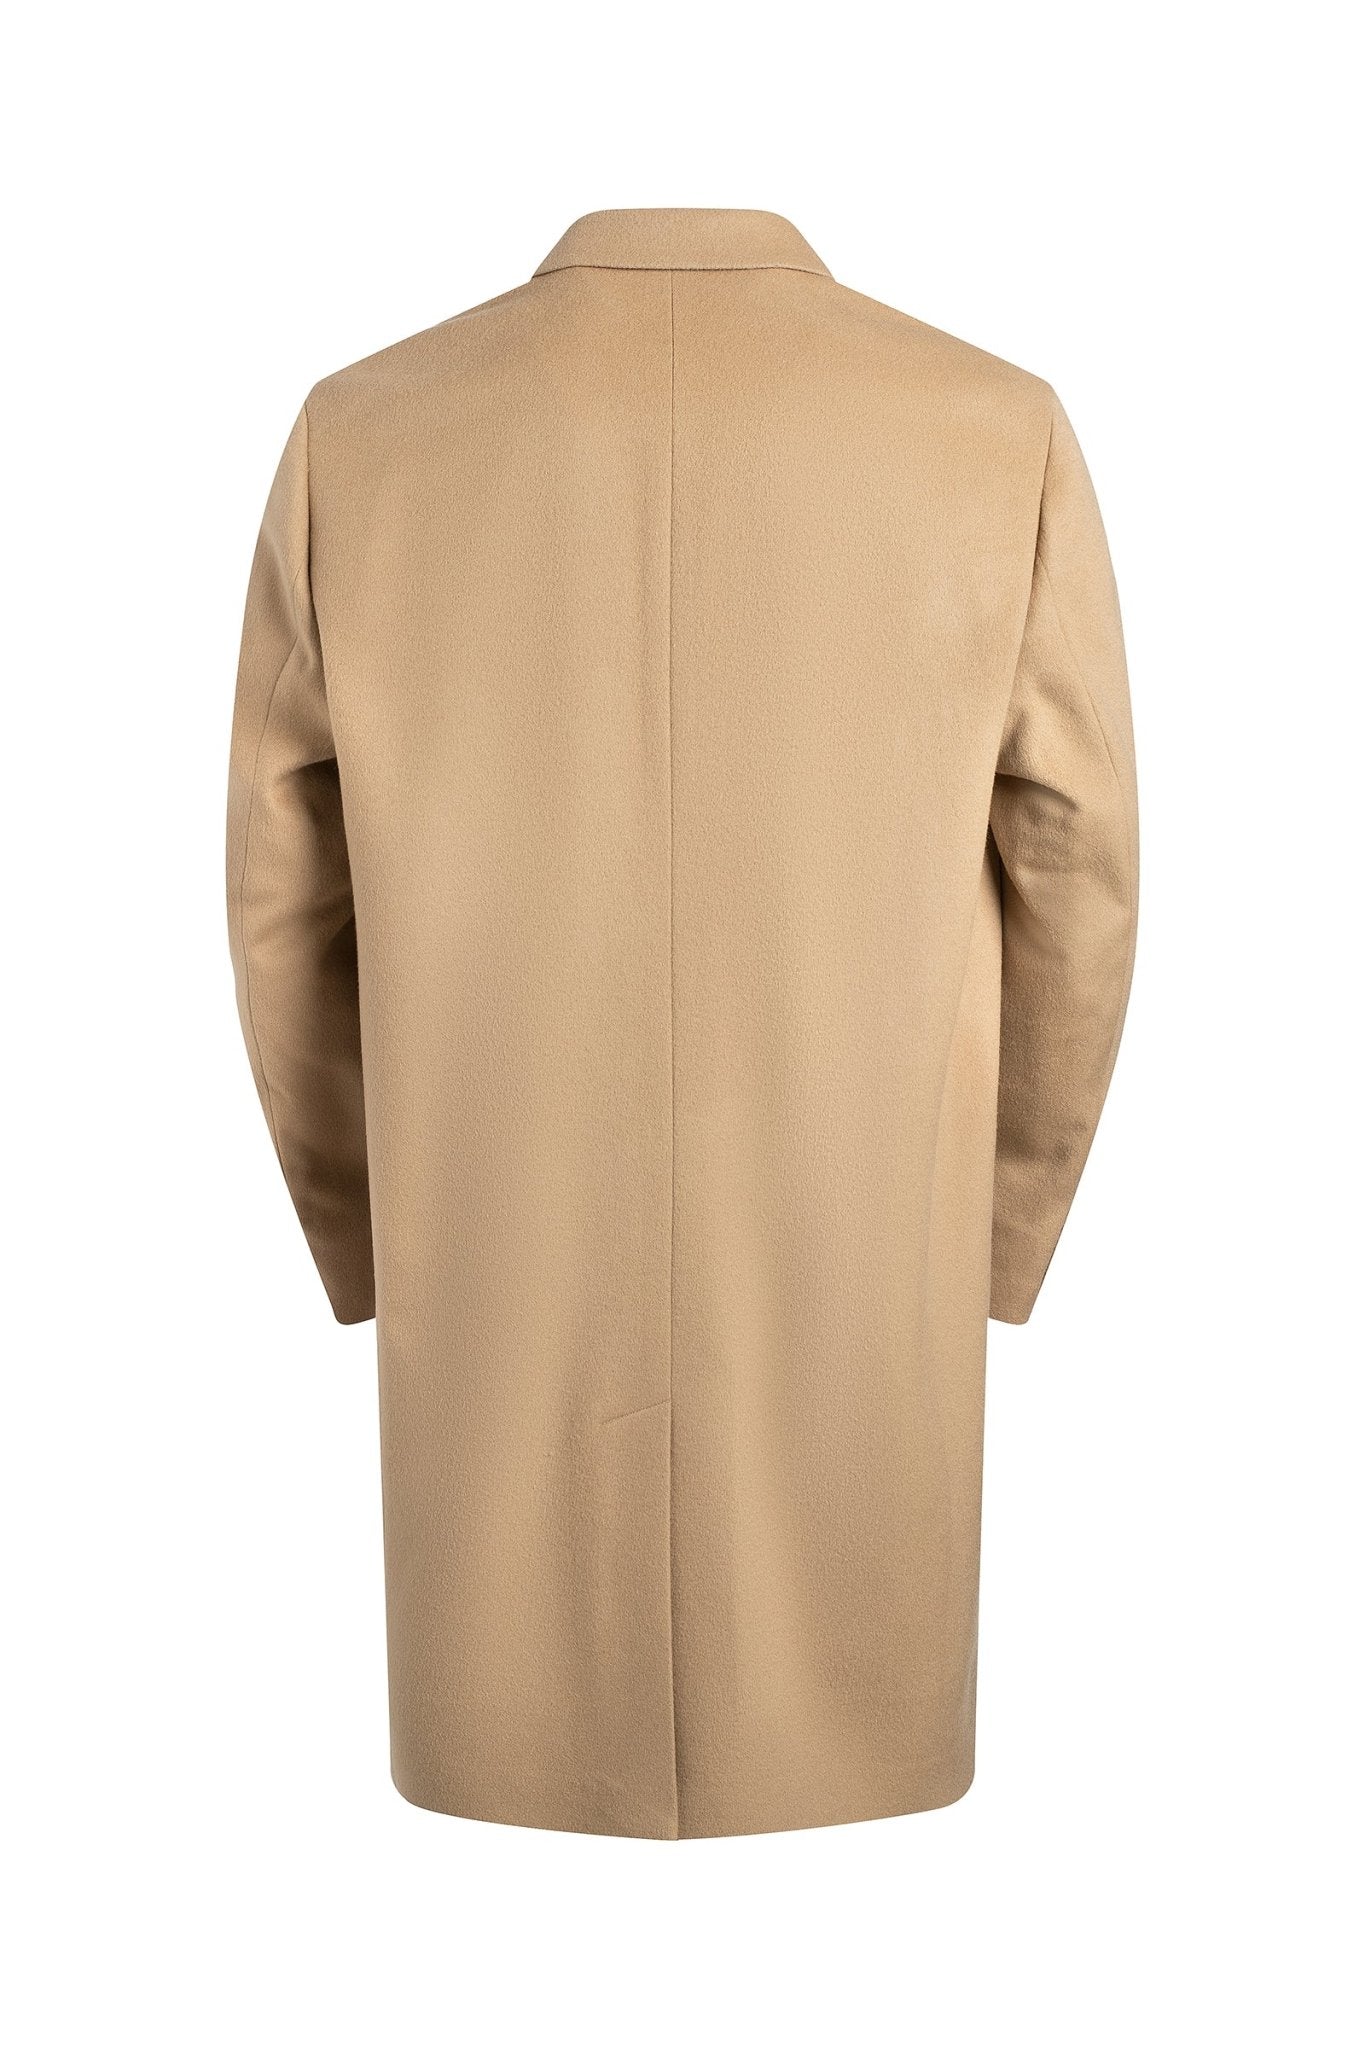 THOMAS WOOL & CASHMERE CAMEL TOPCOAT - Cardinal of Canada-US-Thomas - camel wool and cashmere topcoat 41.5 inch length